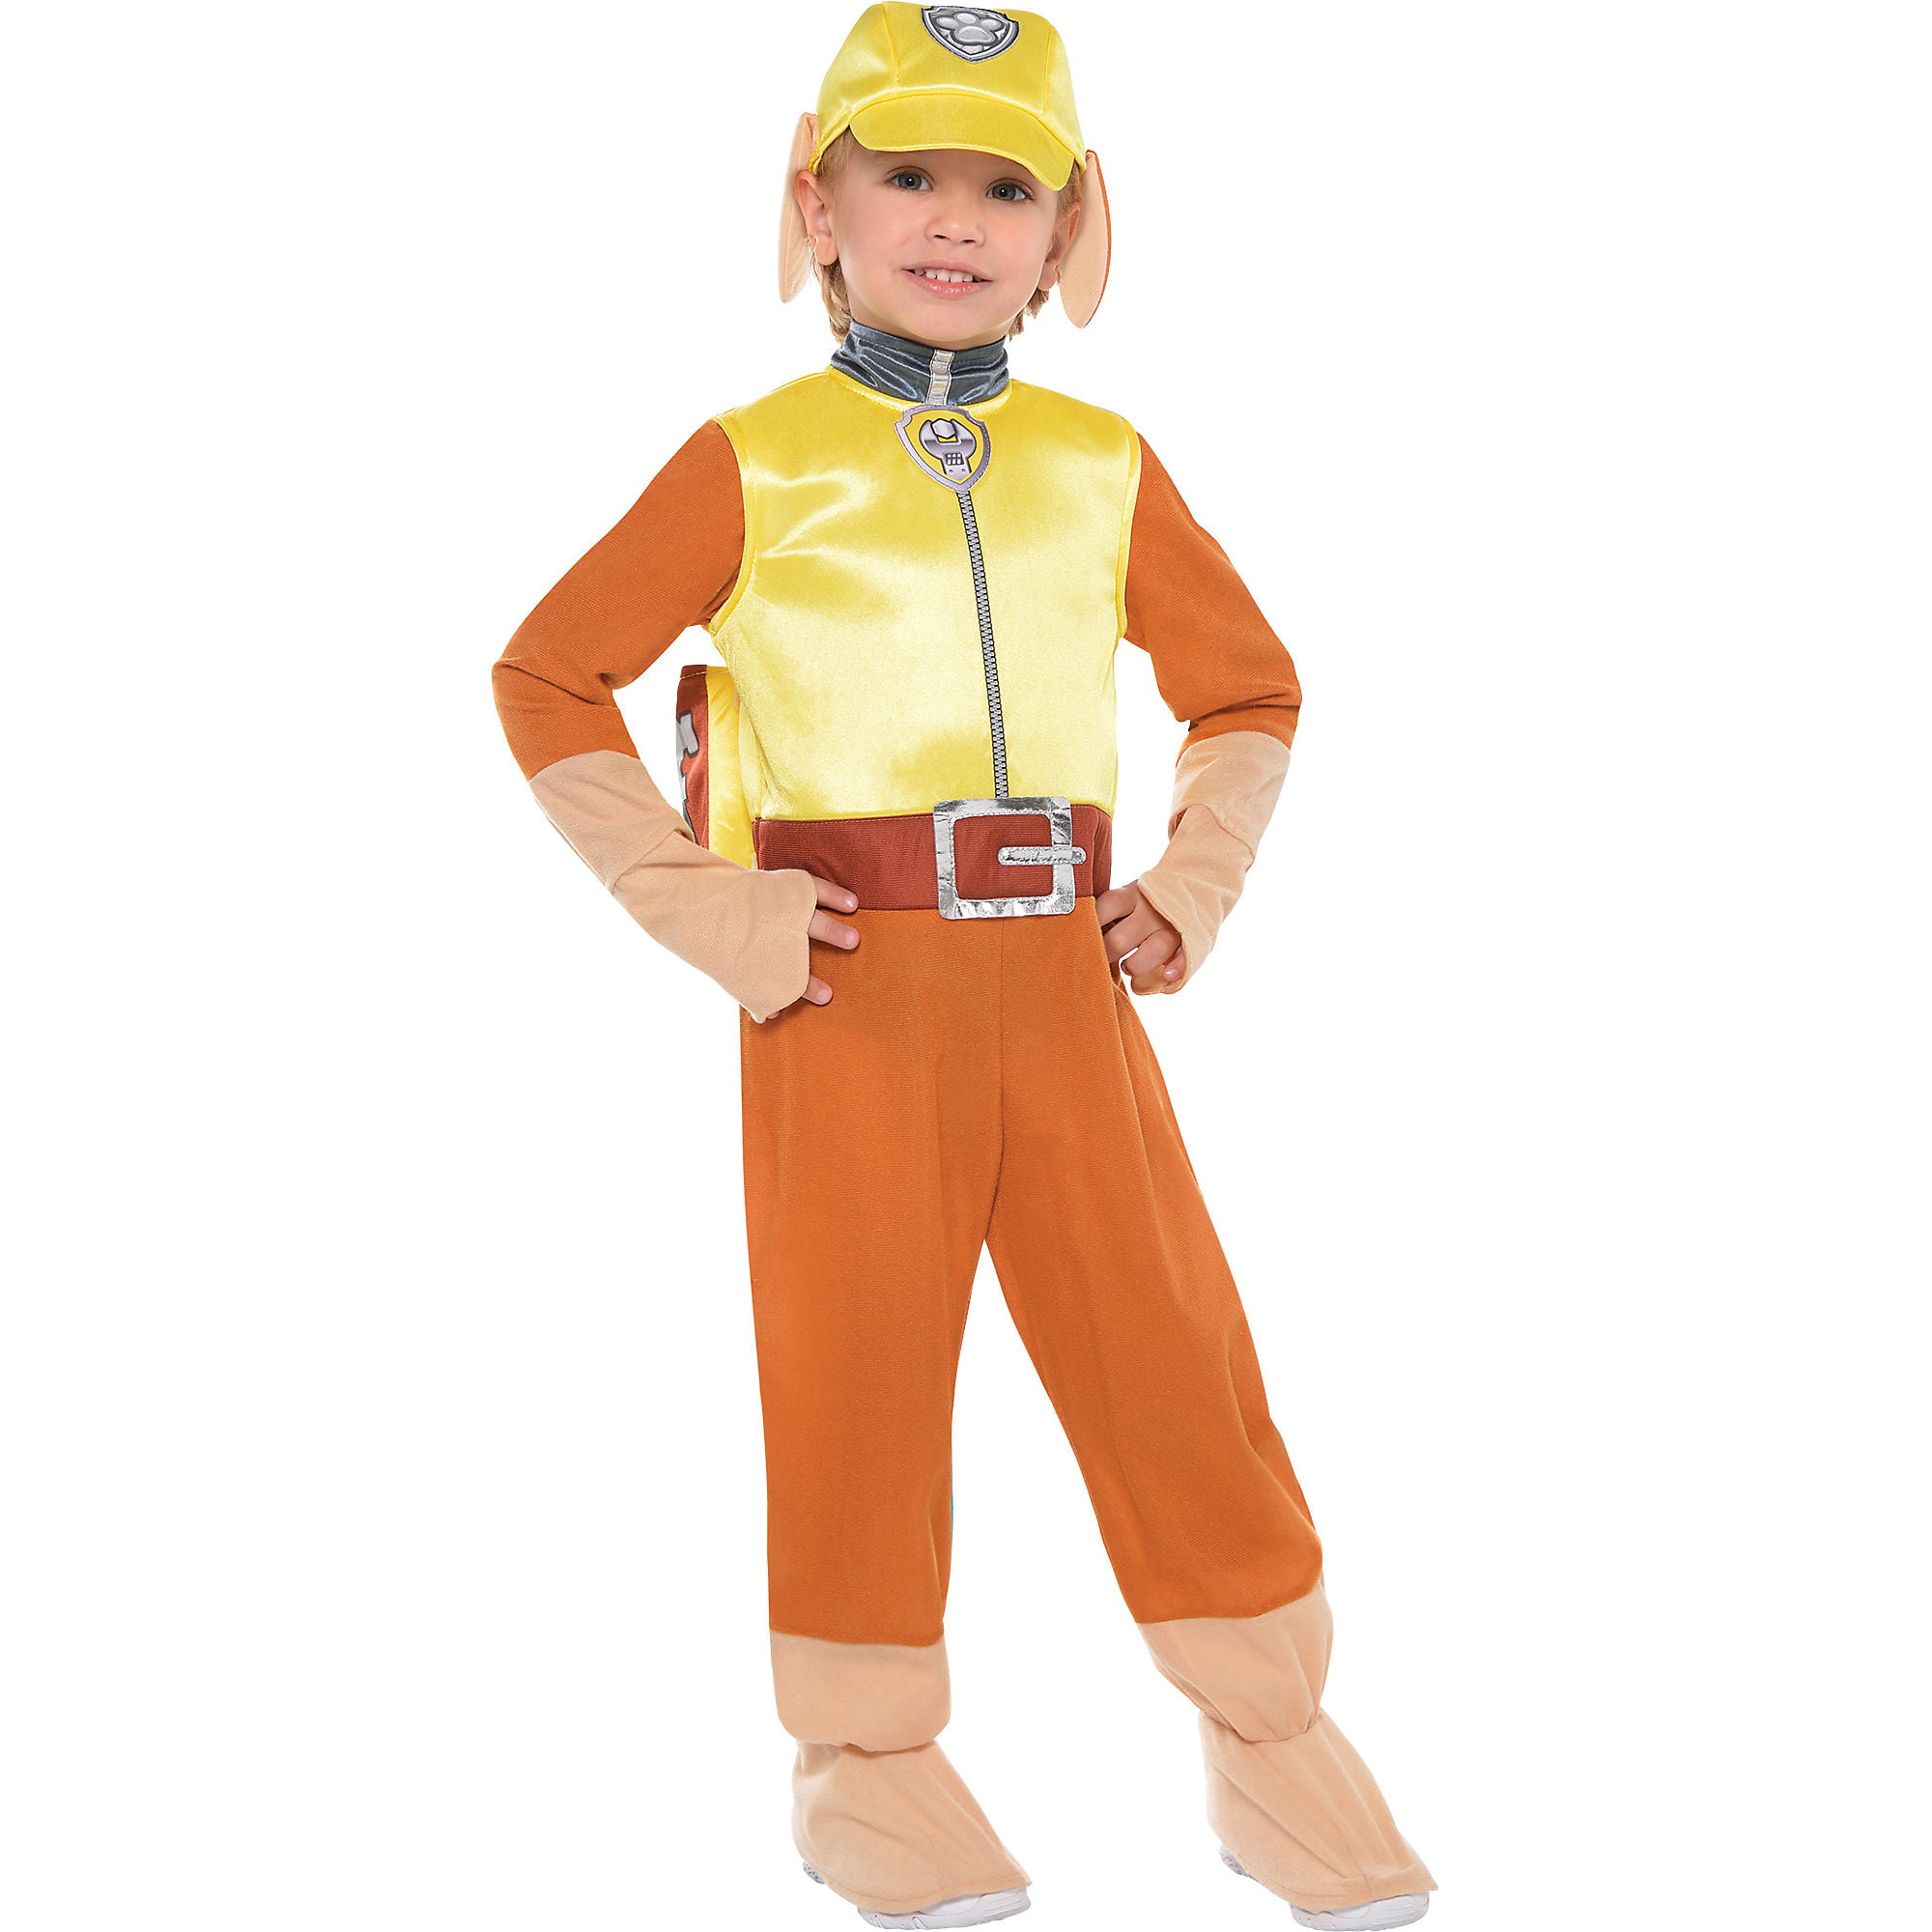 Costumes USA Halloween Costume for PAW Patrol, Small 4-6, Includes Jumpsuit, Hat, Backpack and More Walmart.com